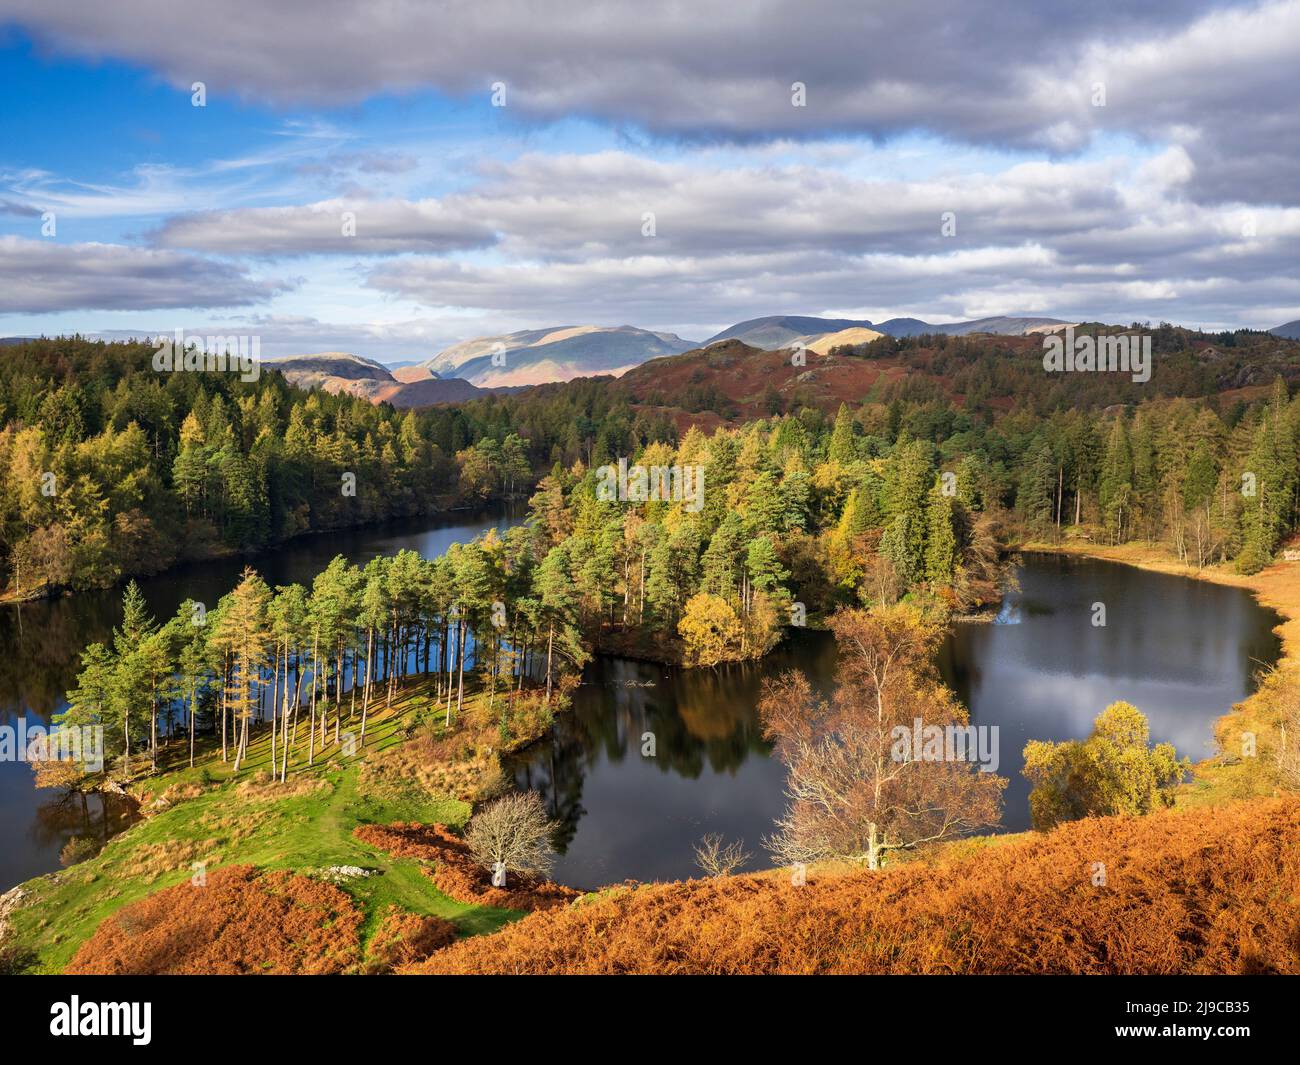 Warm afternoon light at Tarn Hows in the English Lake District. Stock Photo